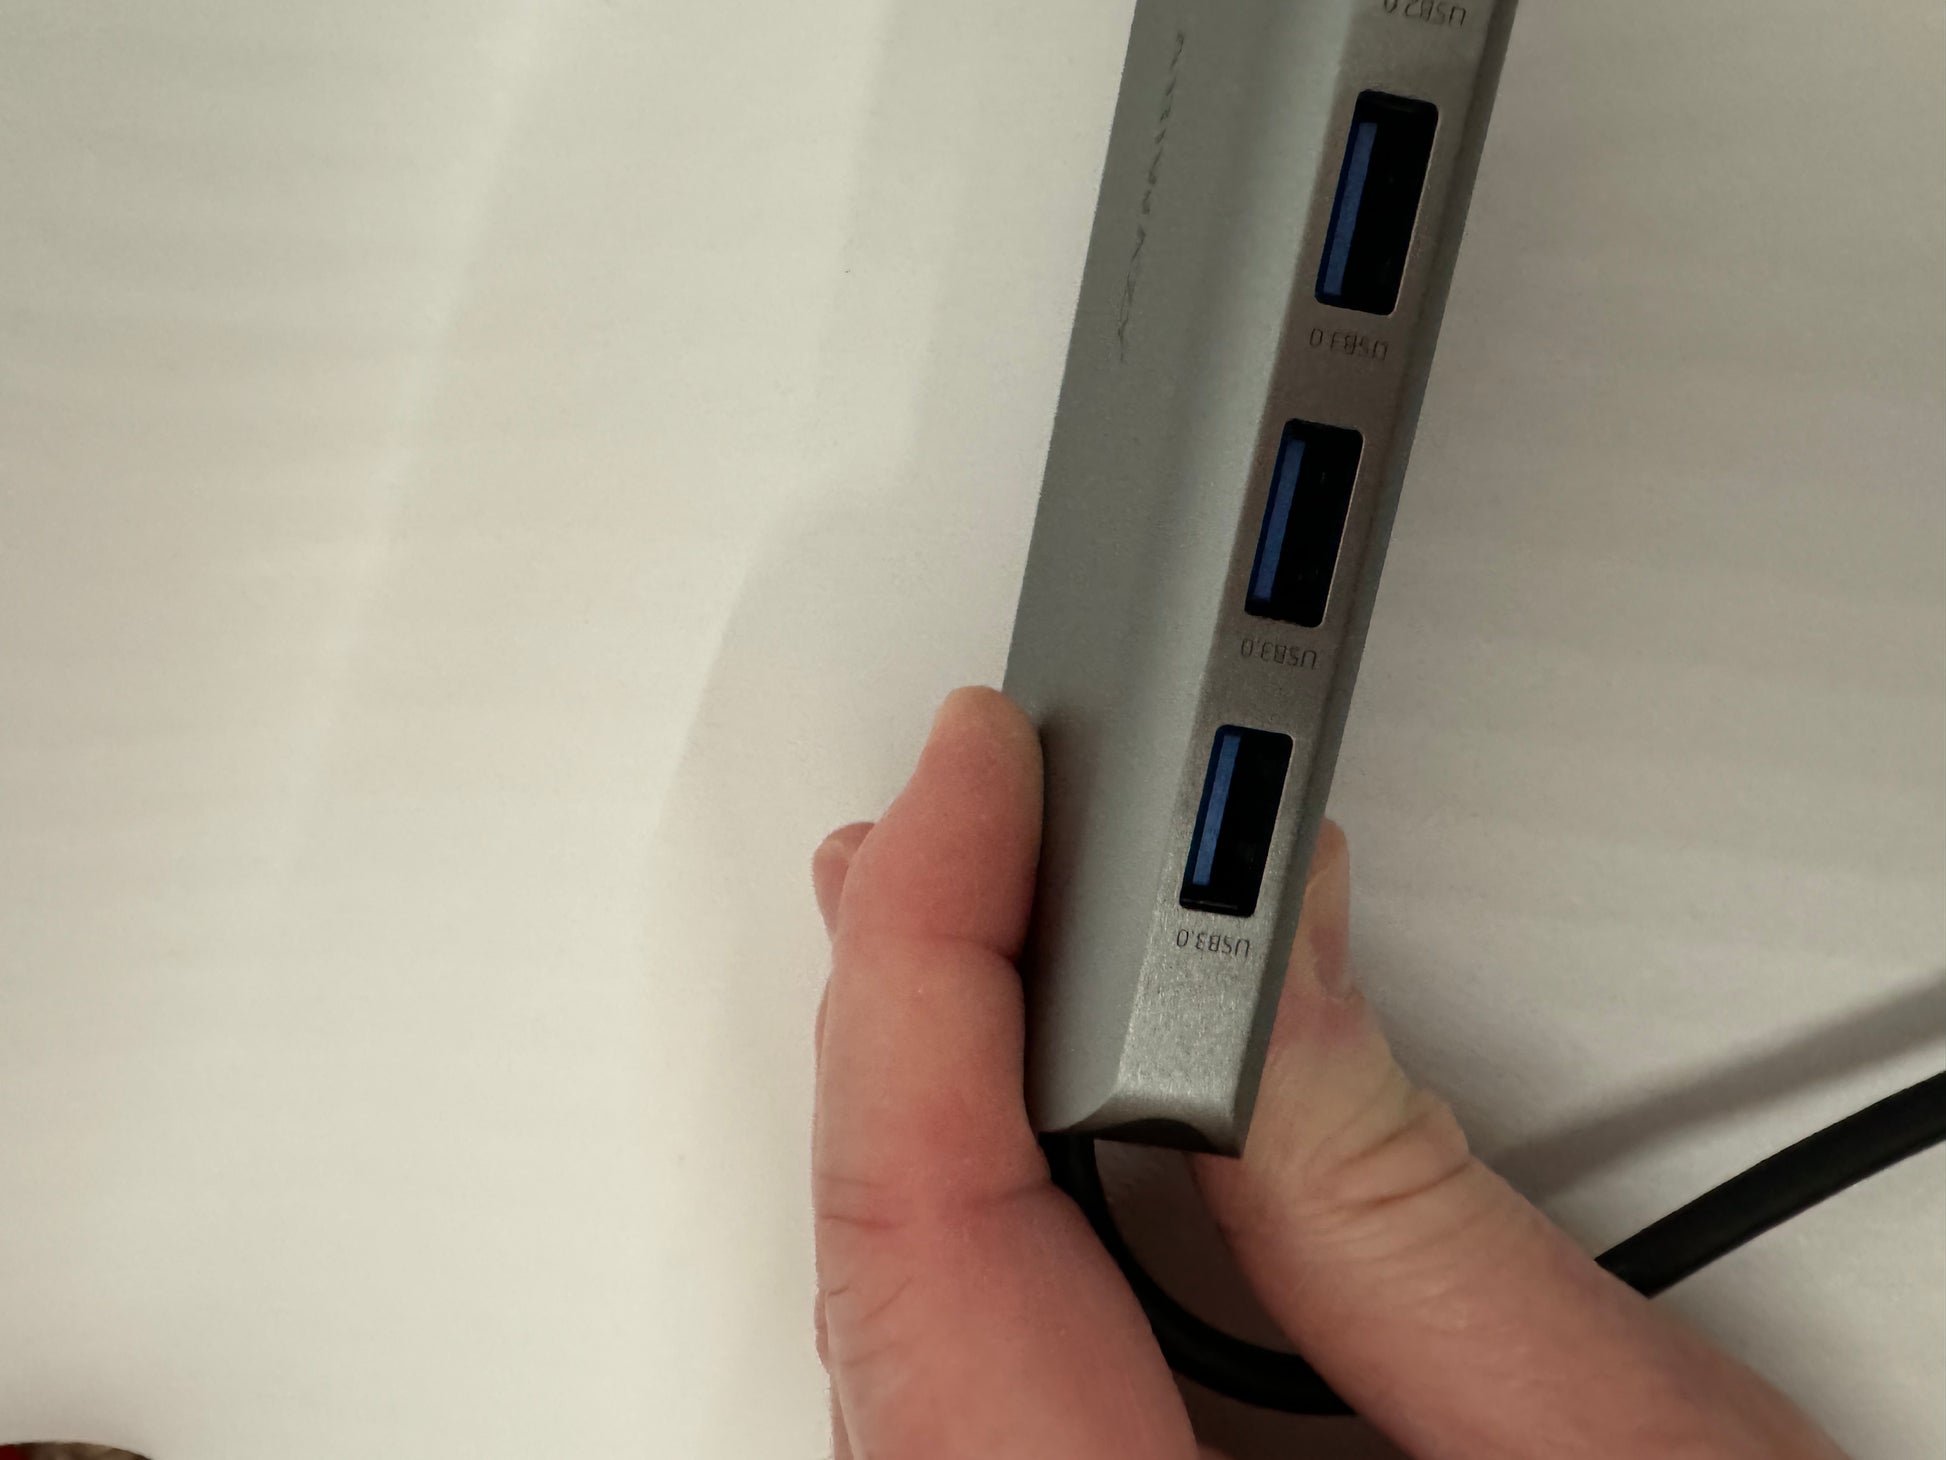 The picture shows a hand holding a gray USB hub. The USB hub has four USB ports, which are vertically aligned. Each port has a label above it that reads "USB 3.0". The background is a plain white surface.